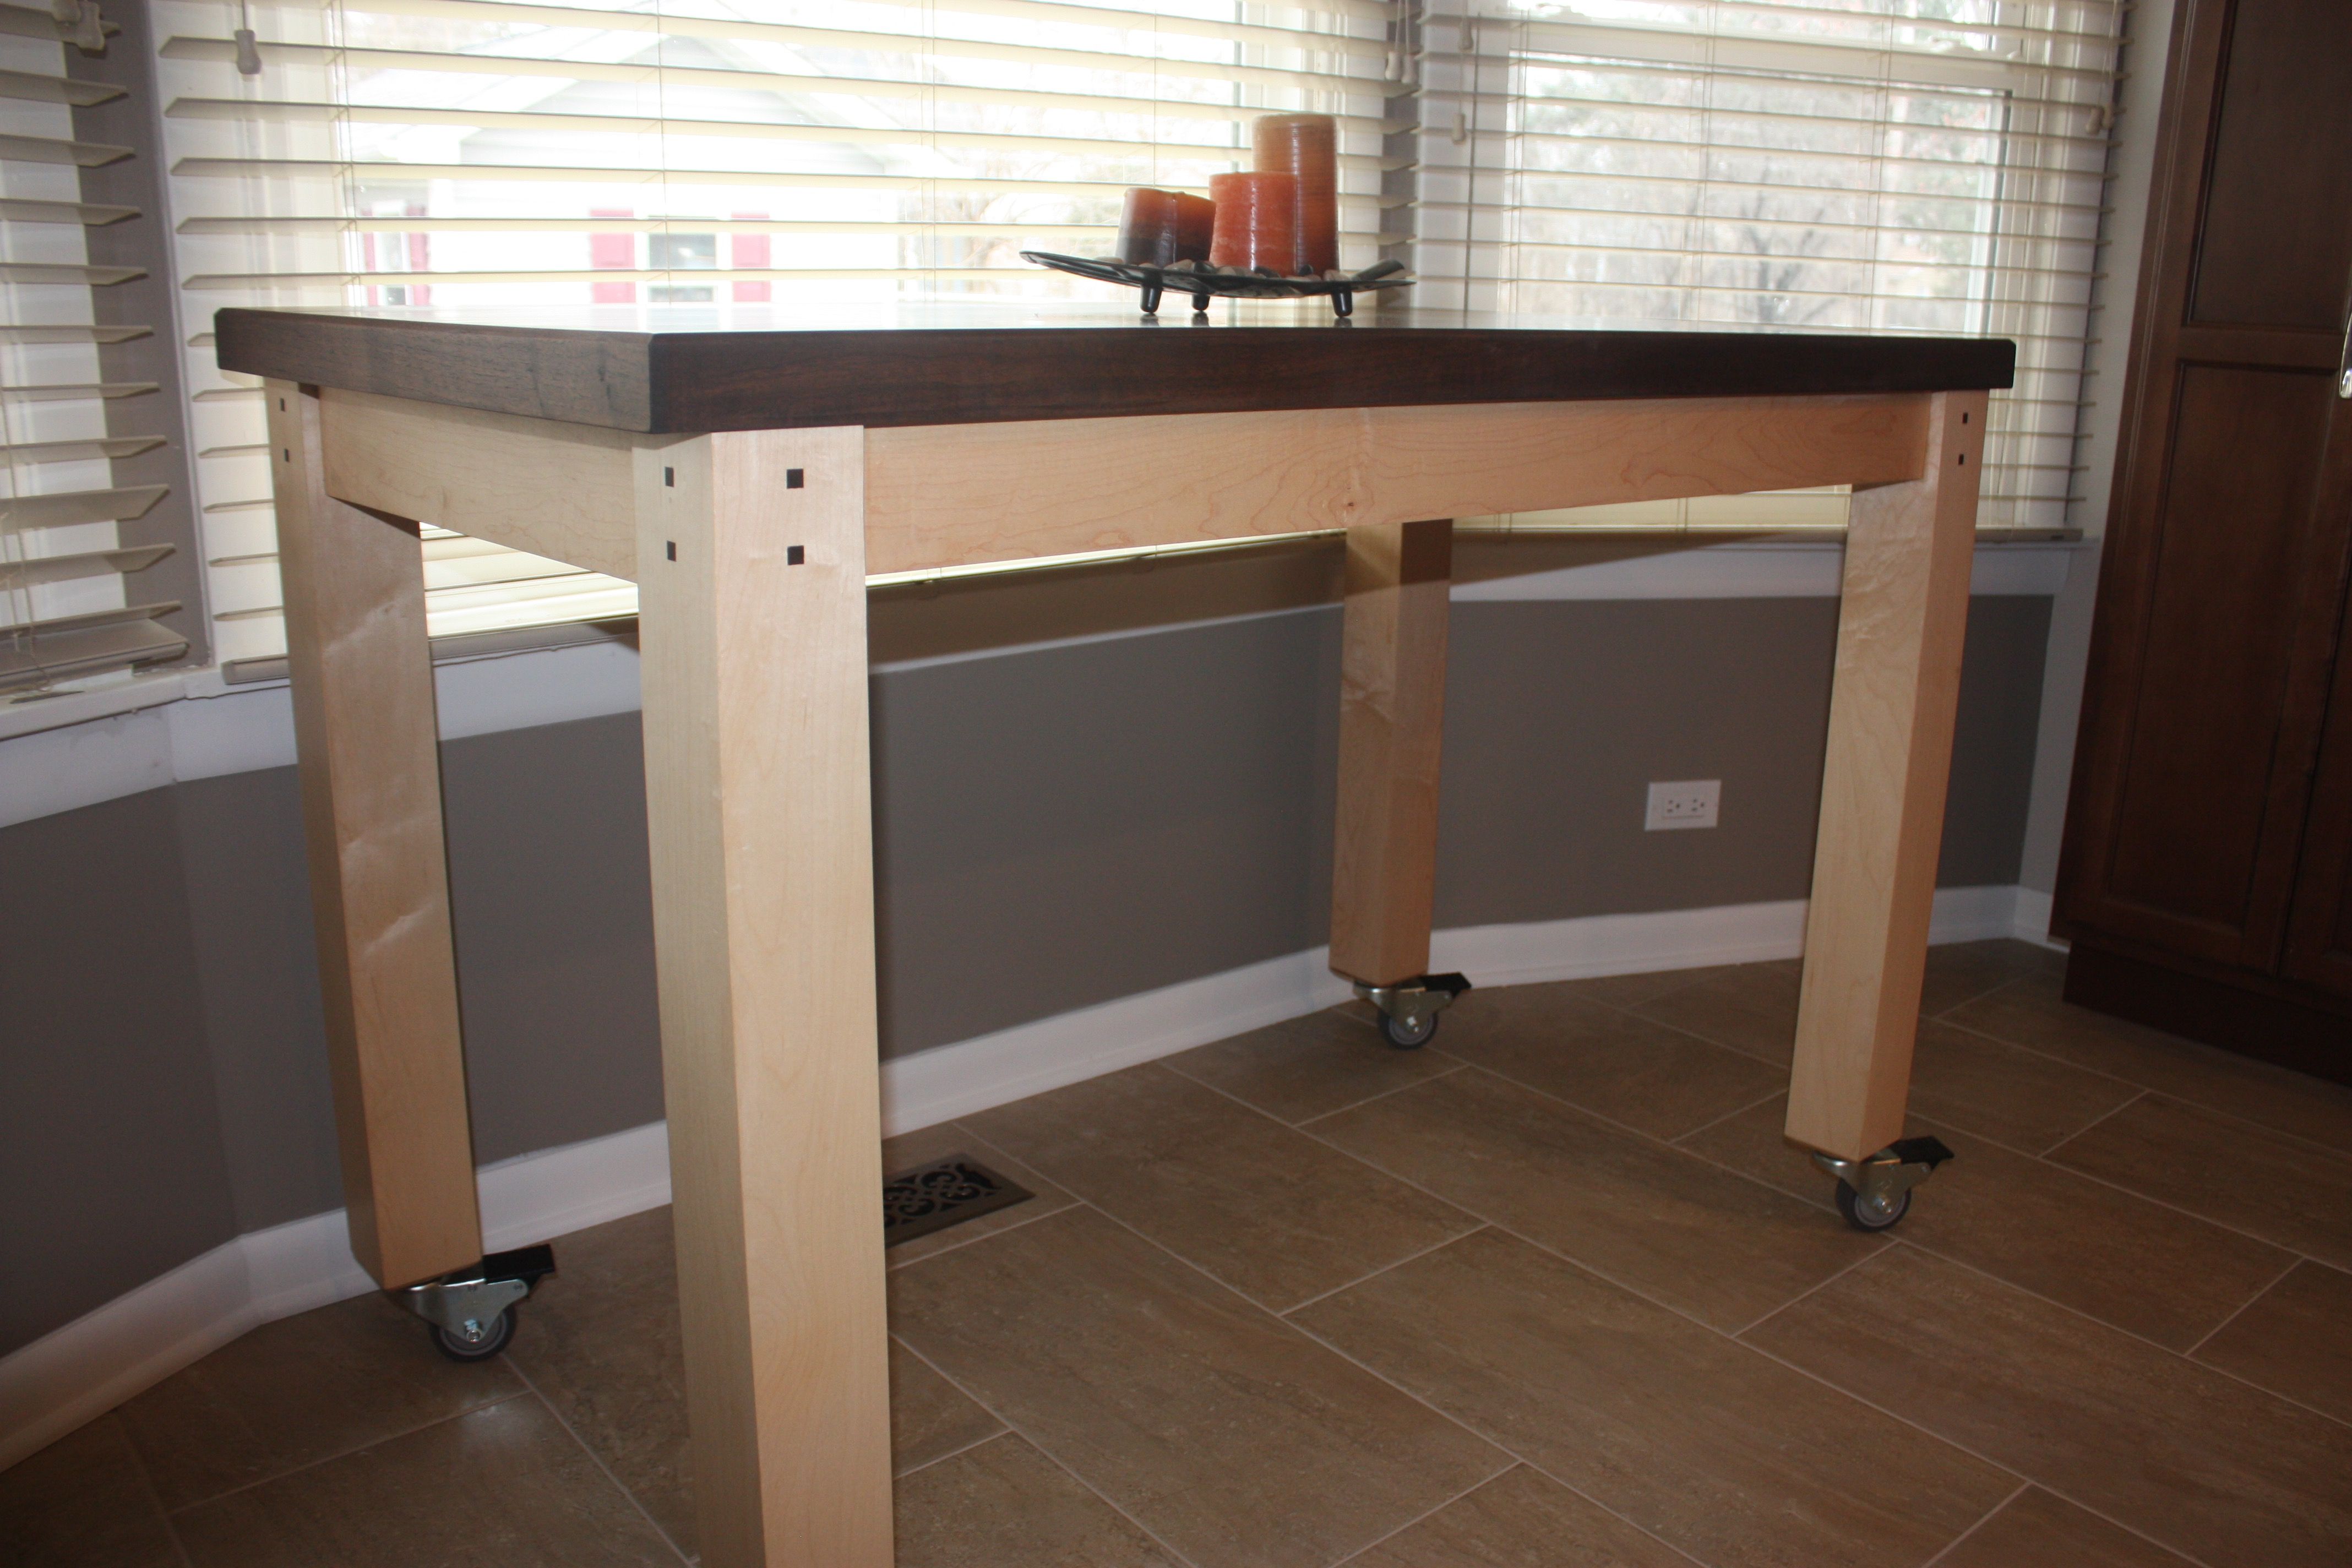 2ft x 2ft kitchen working table